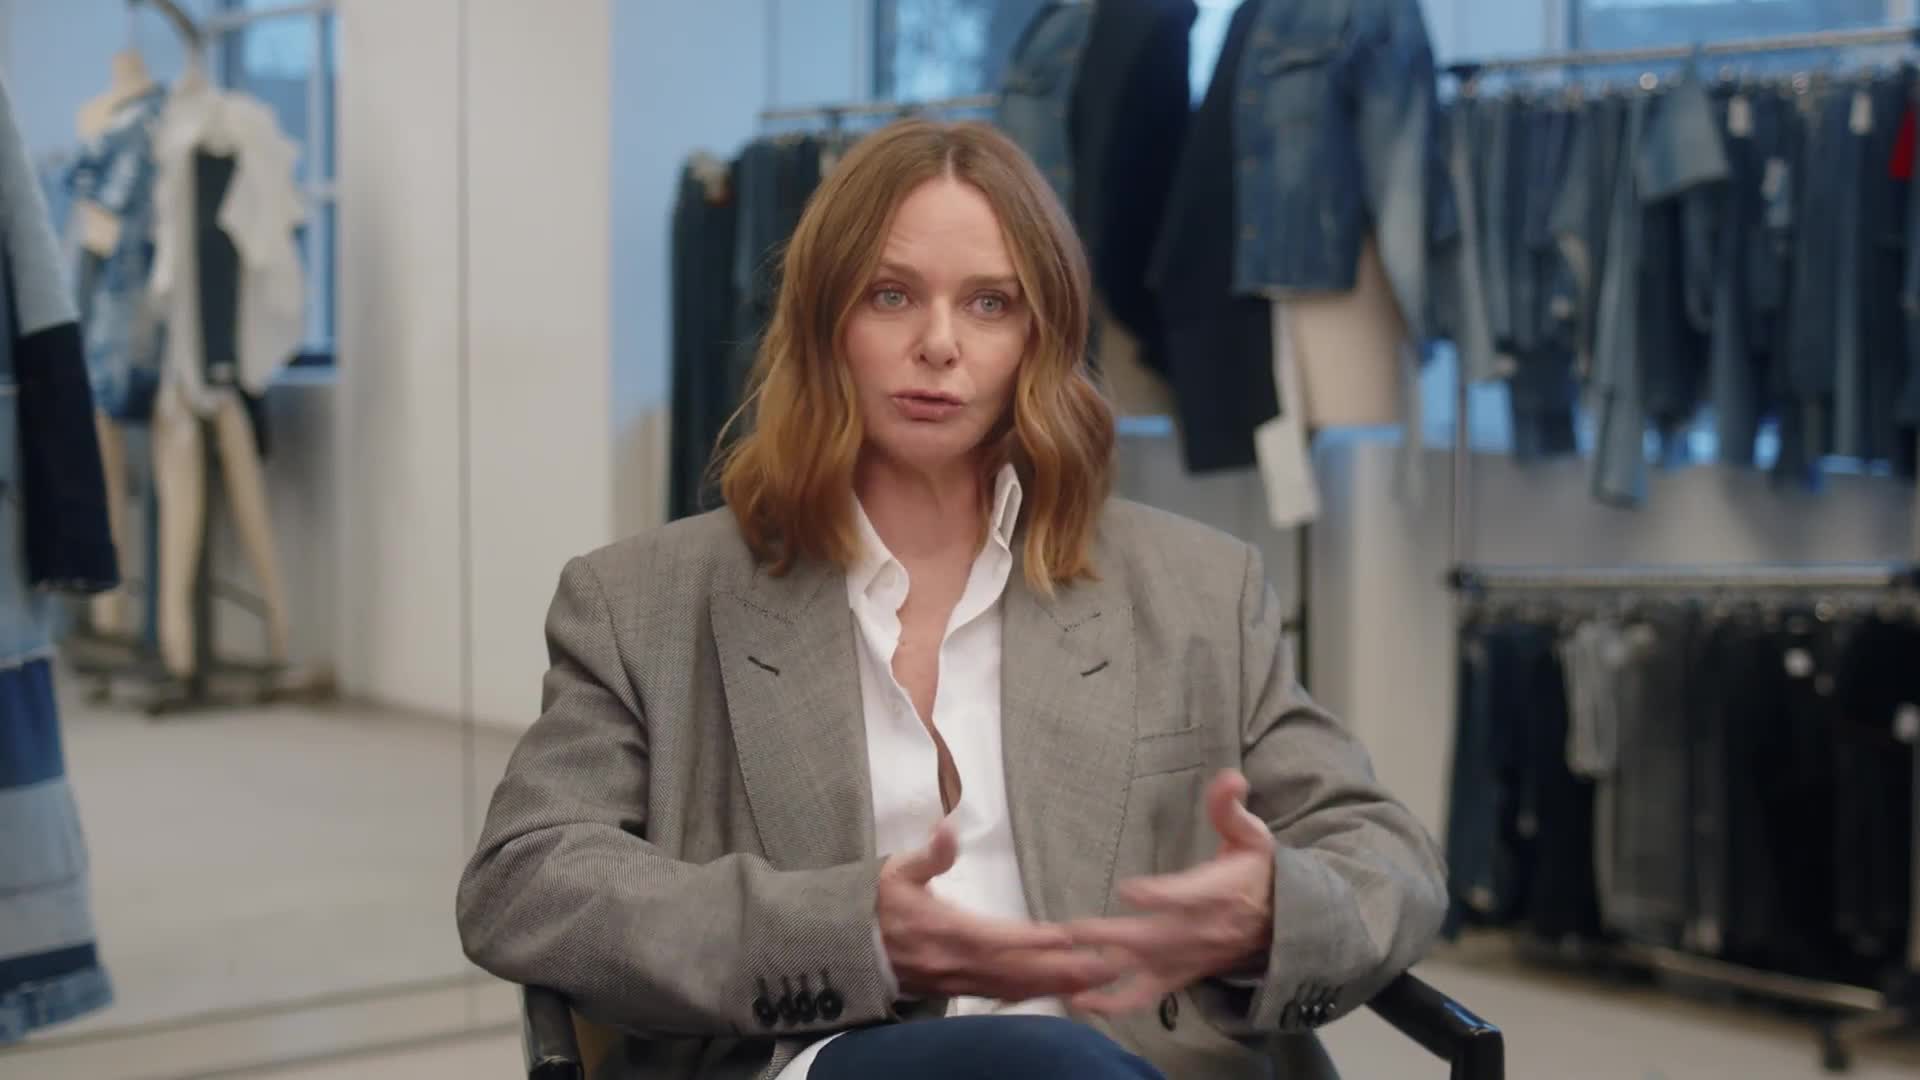 How Designers Like Stella McCartney Pair Good Style and Doing Good